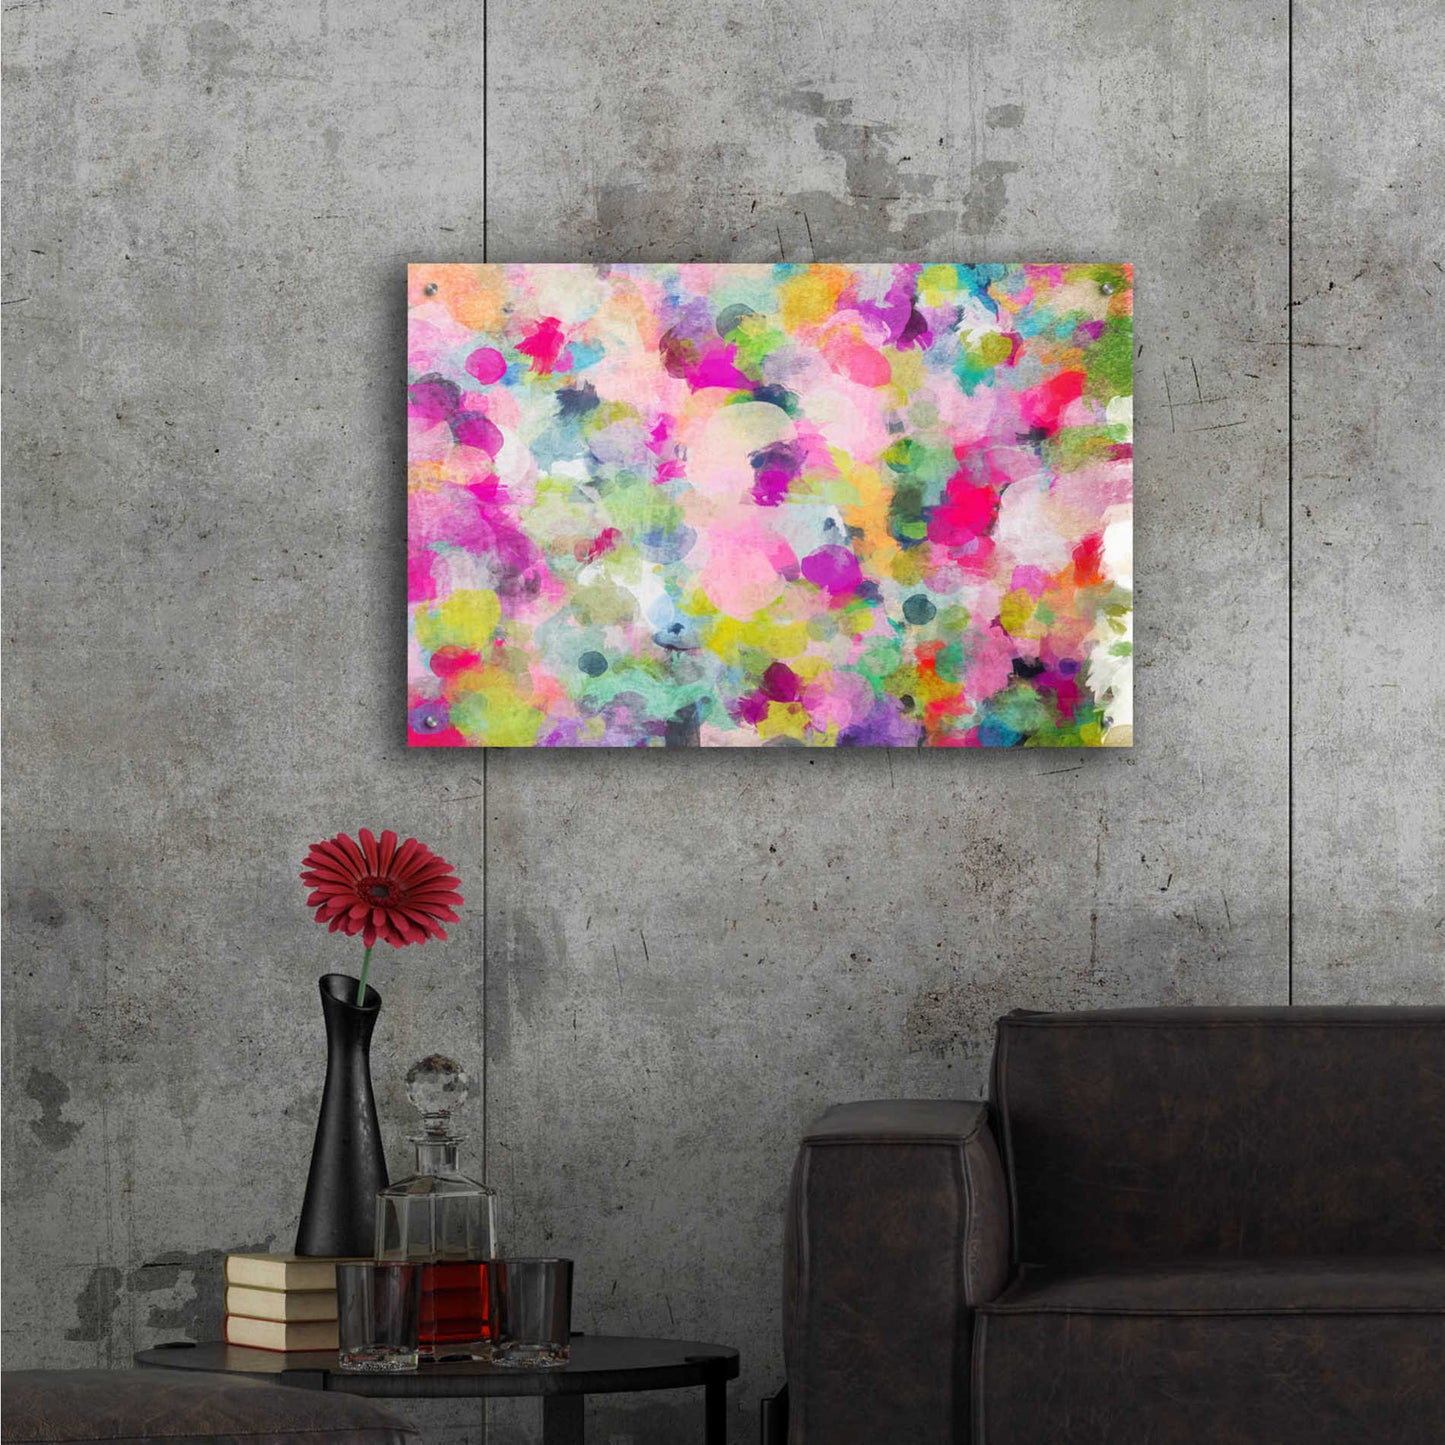 Epic Art 'Abstract Colorful Flows 4' by Irena Orlov Acrylic Glass Wall Art,36x24